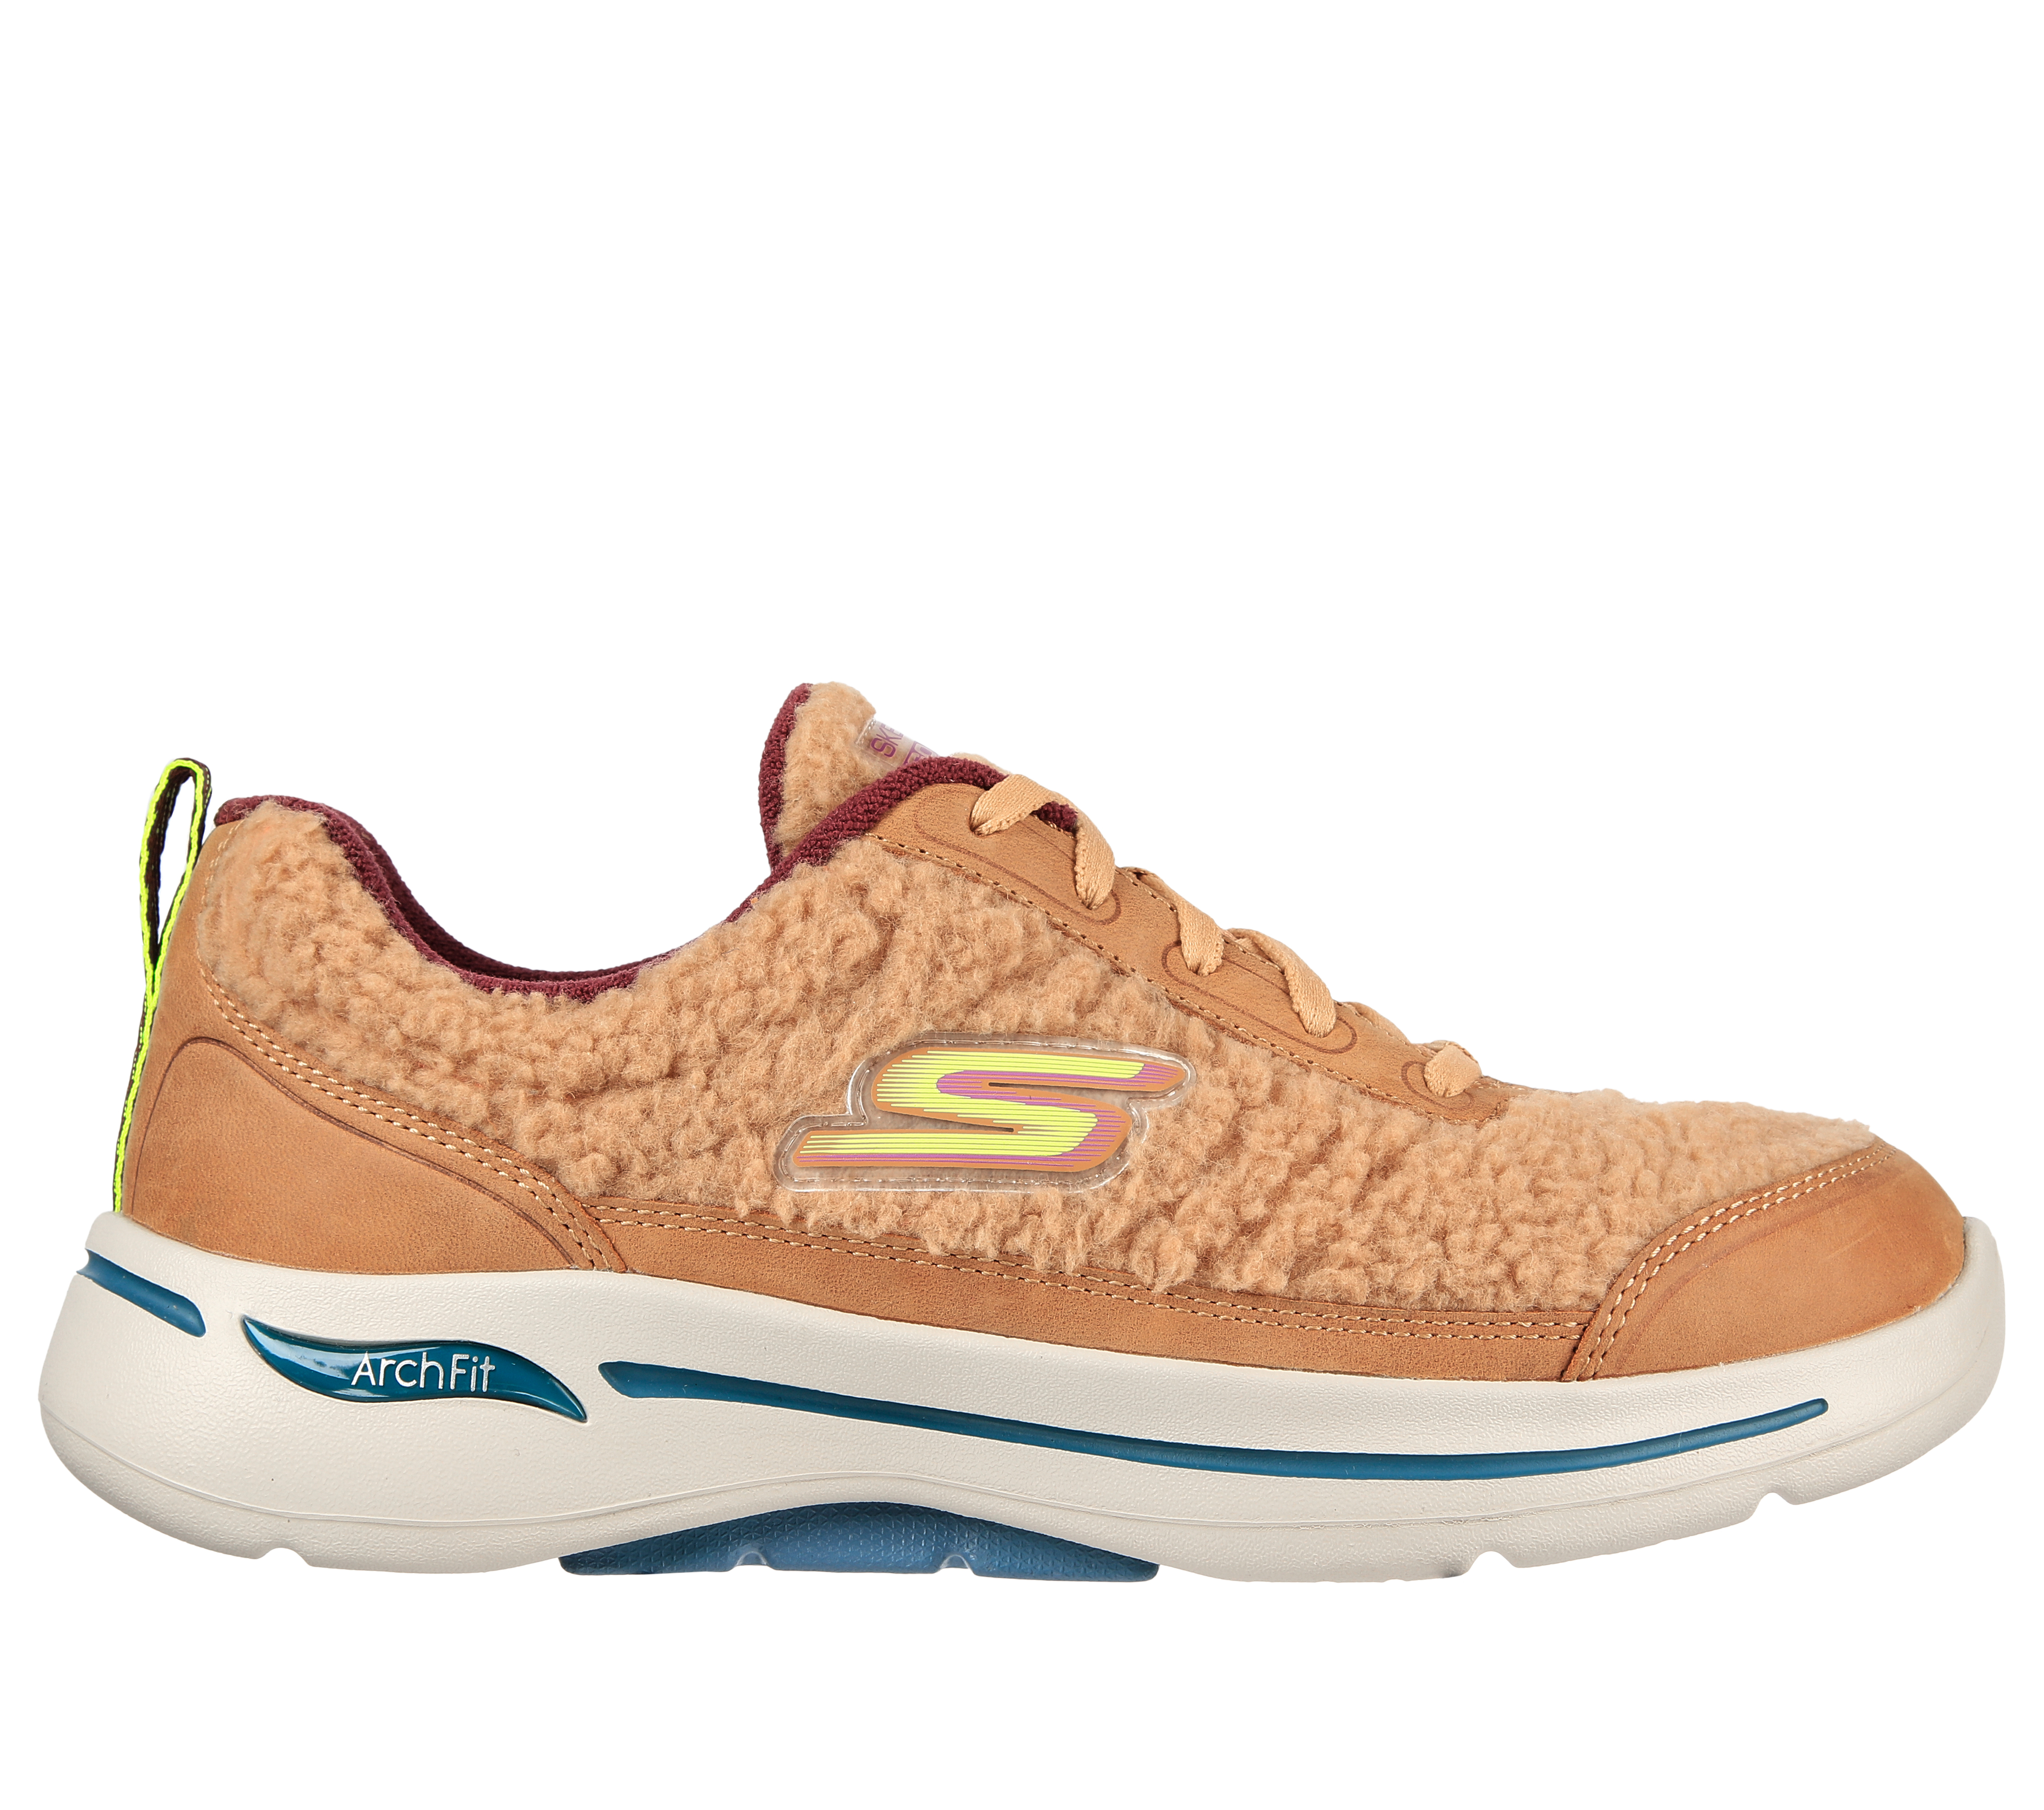 skechers shoes malaysia promotion